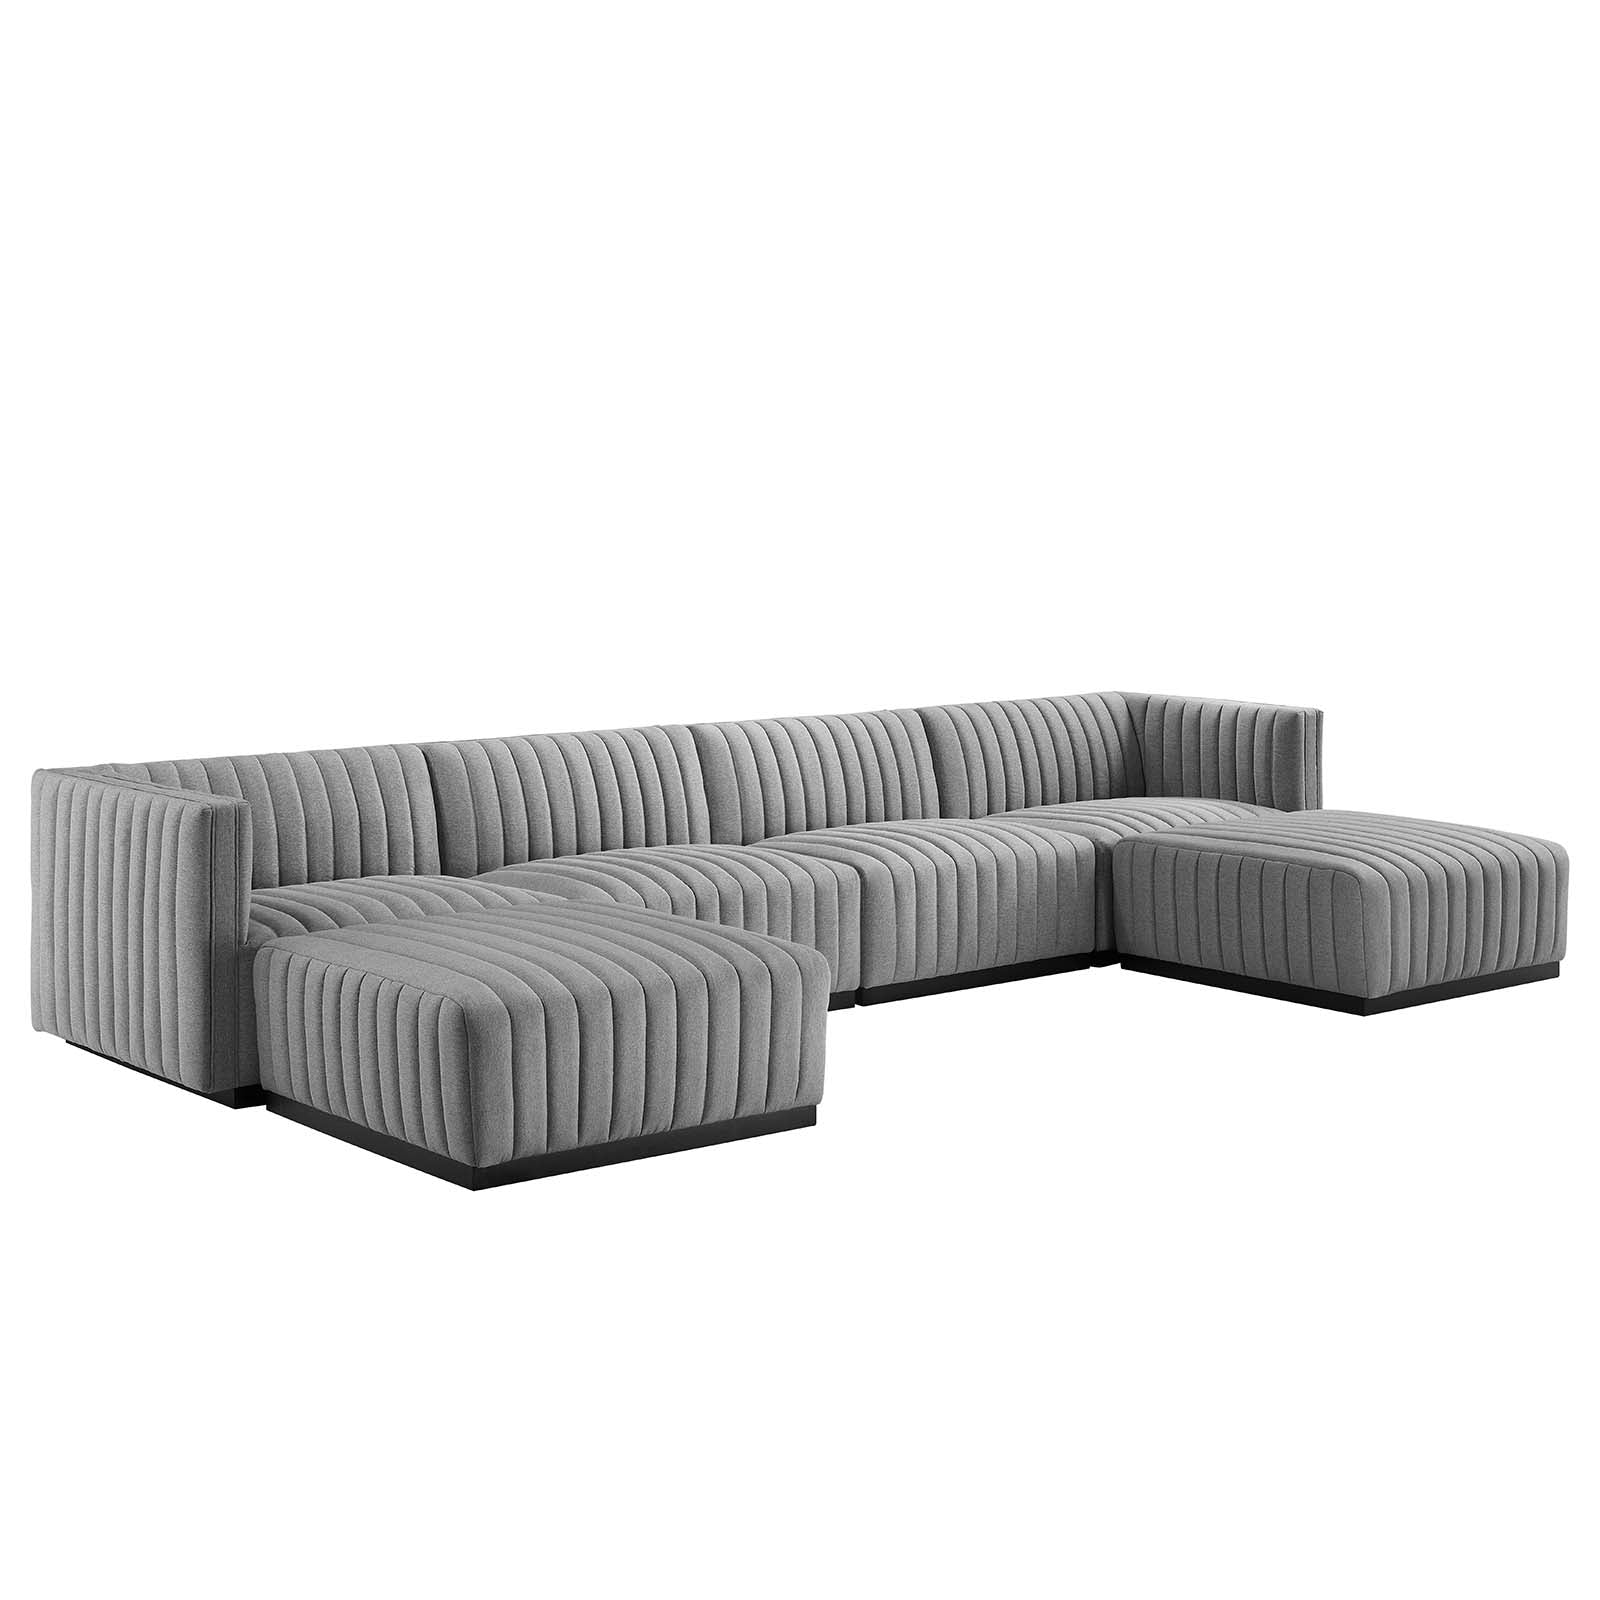 Conjure Channel Tufted Upholstered Fabric 6-Piece Sectional Sofa - East Shore Modern Home Furnishings